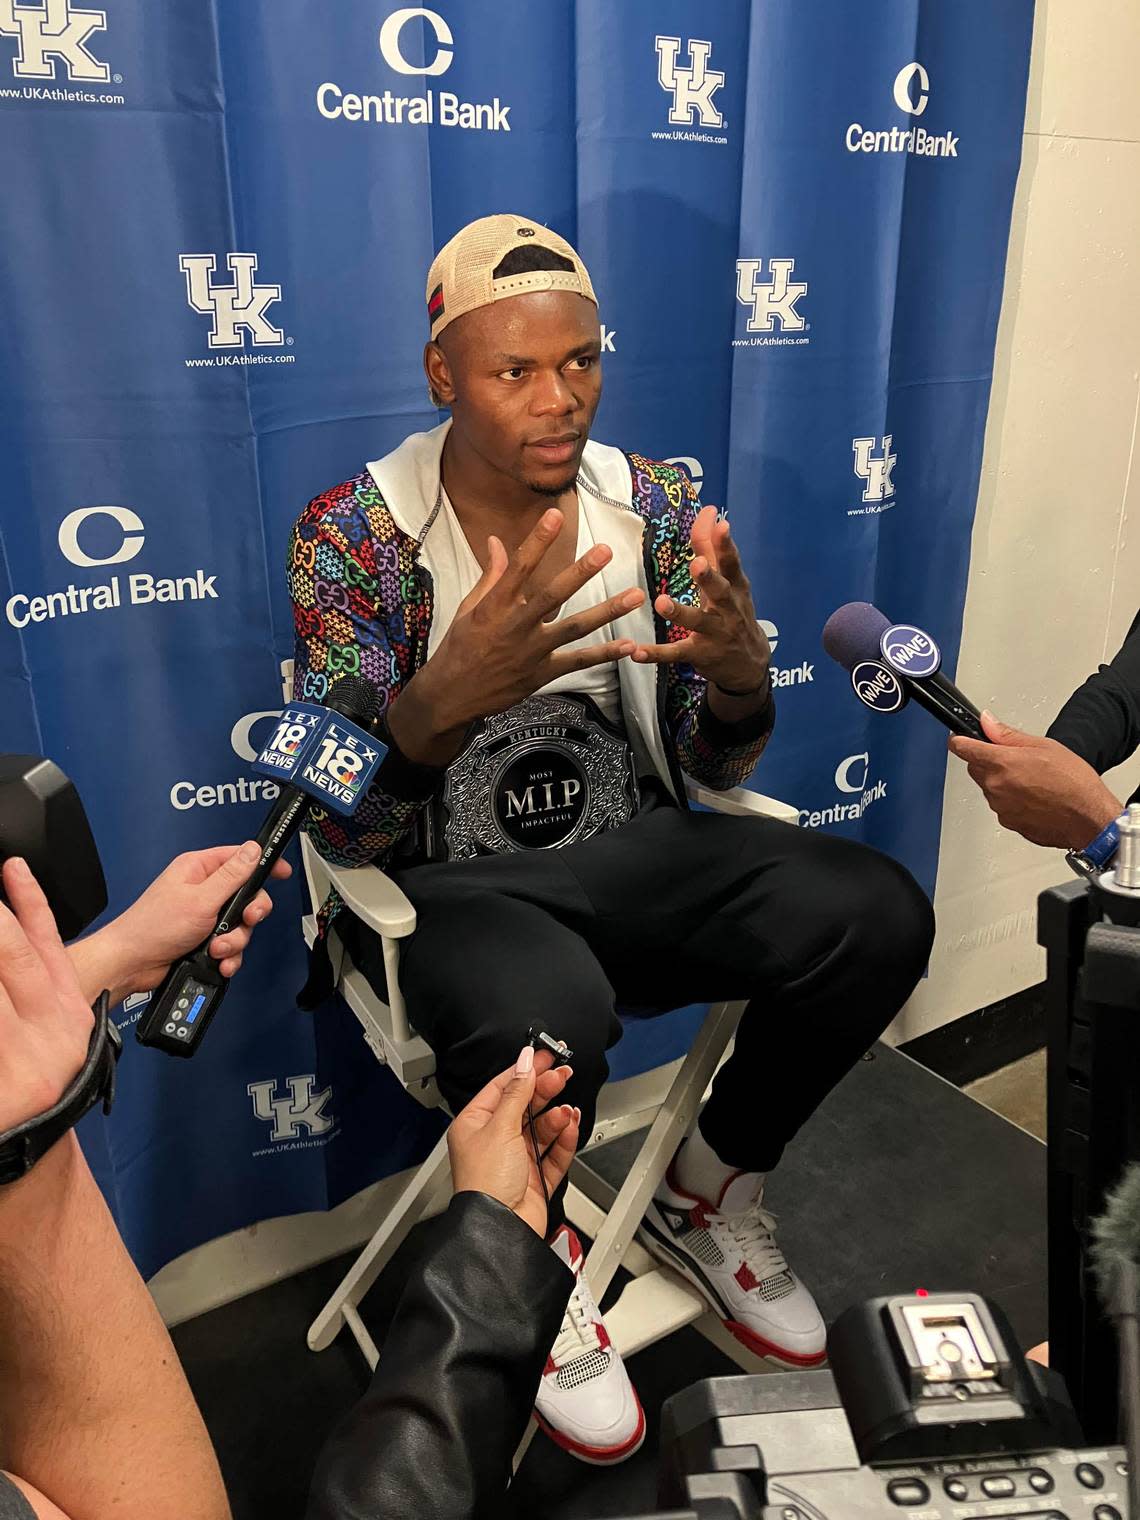 Kentucky’s Oscar Tshiebwe answers questions from media members while wearing UK’s Most Impactful Player belt following the team’s win over North Florida on Nov. 23. The belt is only awarded to a UK player after games that Kentucky wins.